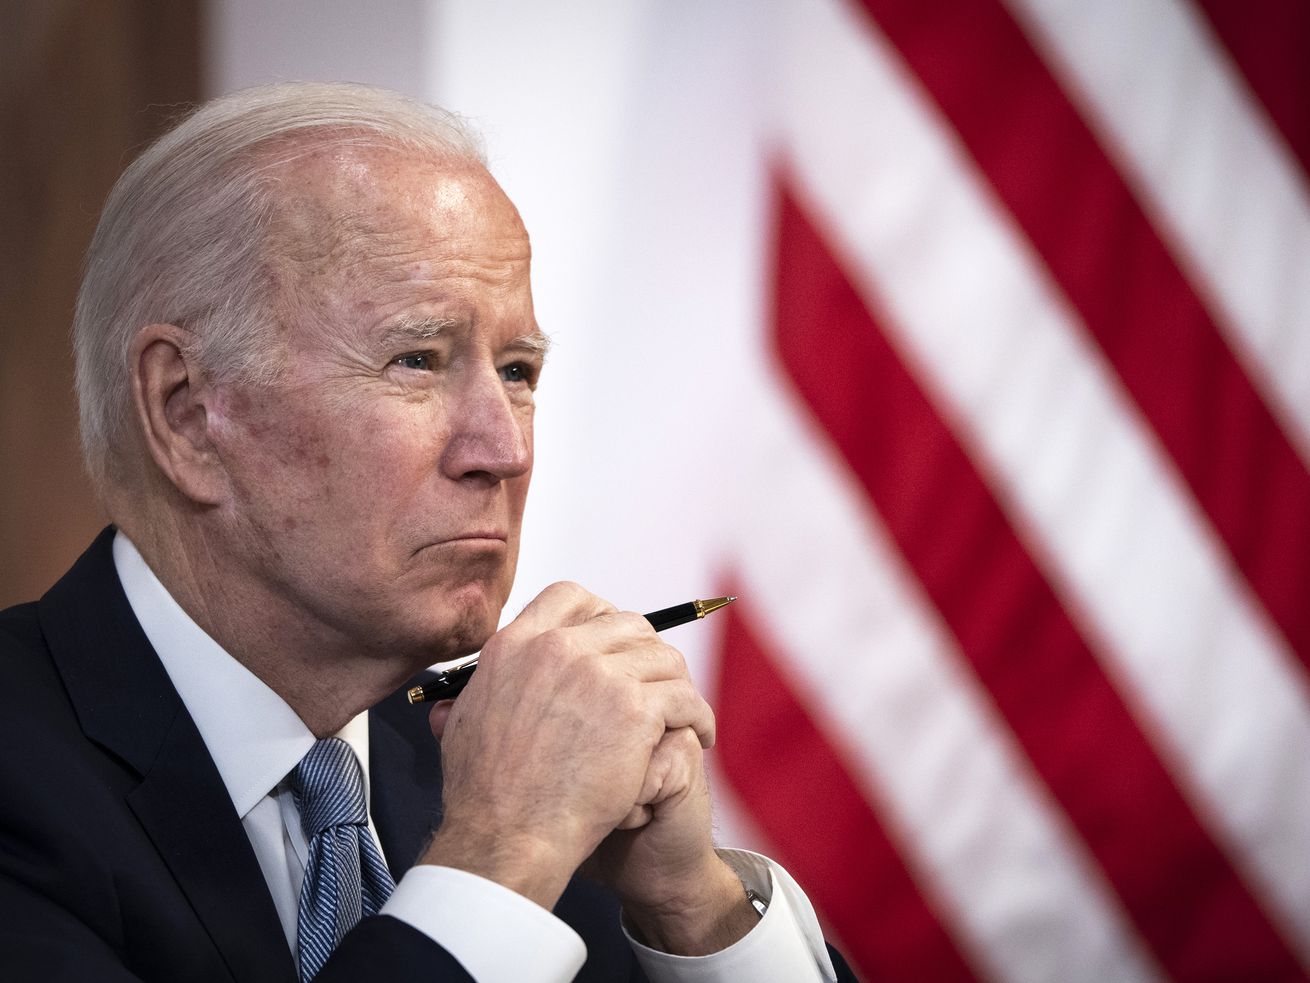 3 executive actions Biden could try to protect abortion rights